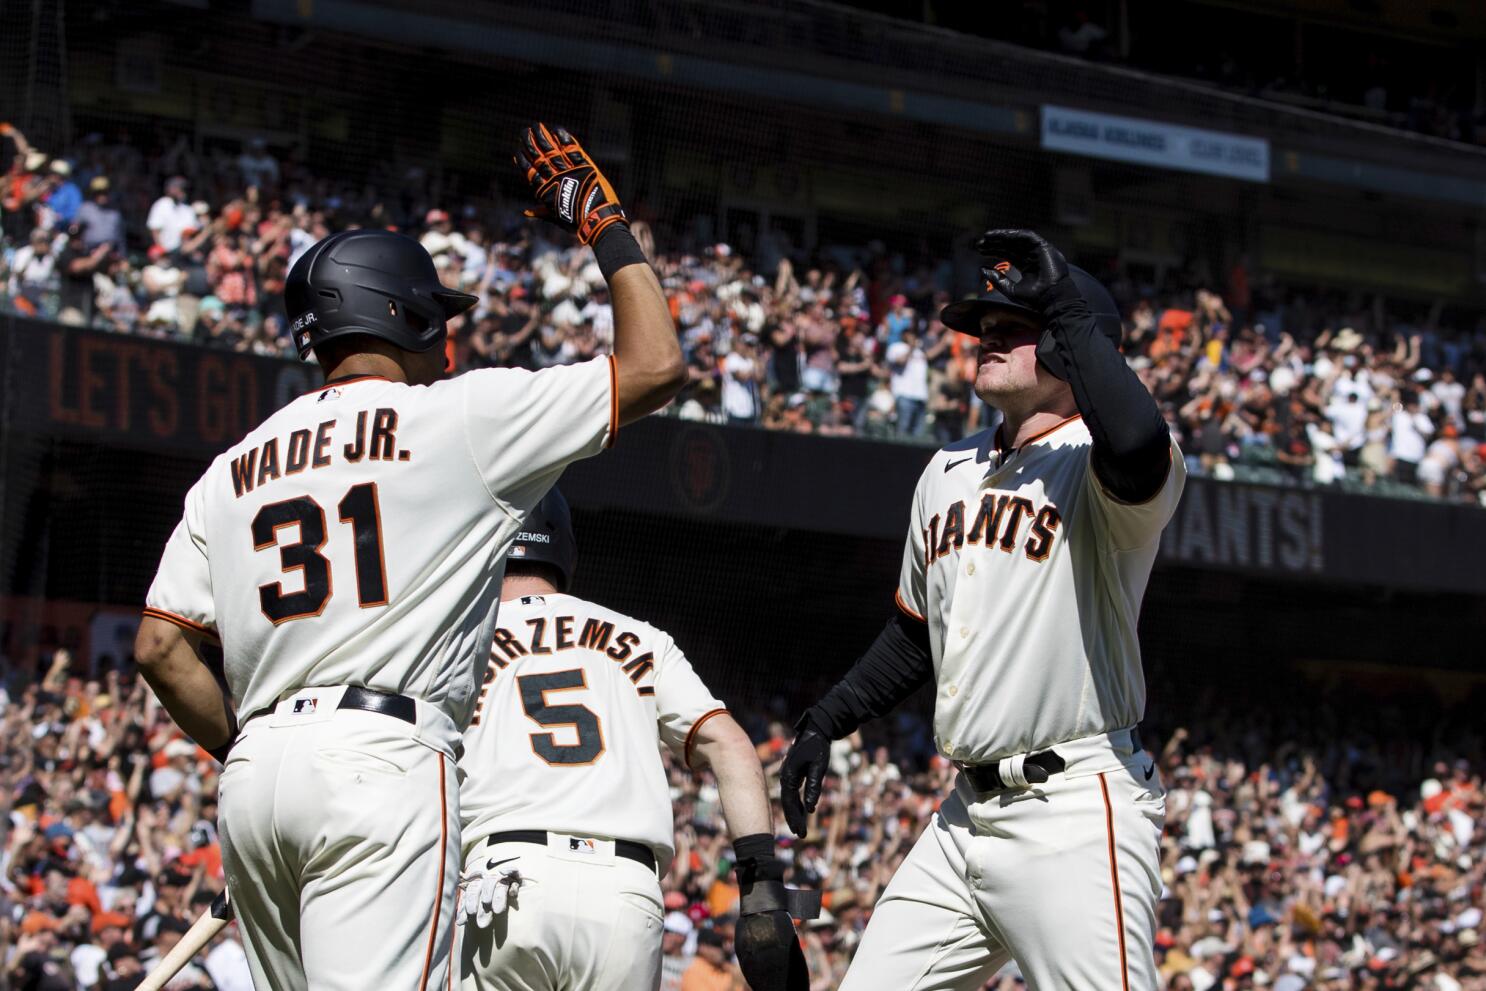 Where do the 107-win Giants go from here after early postseason